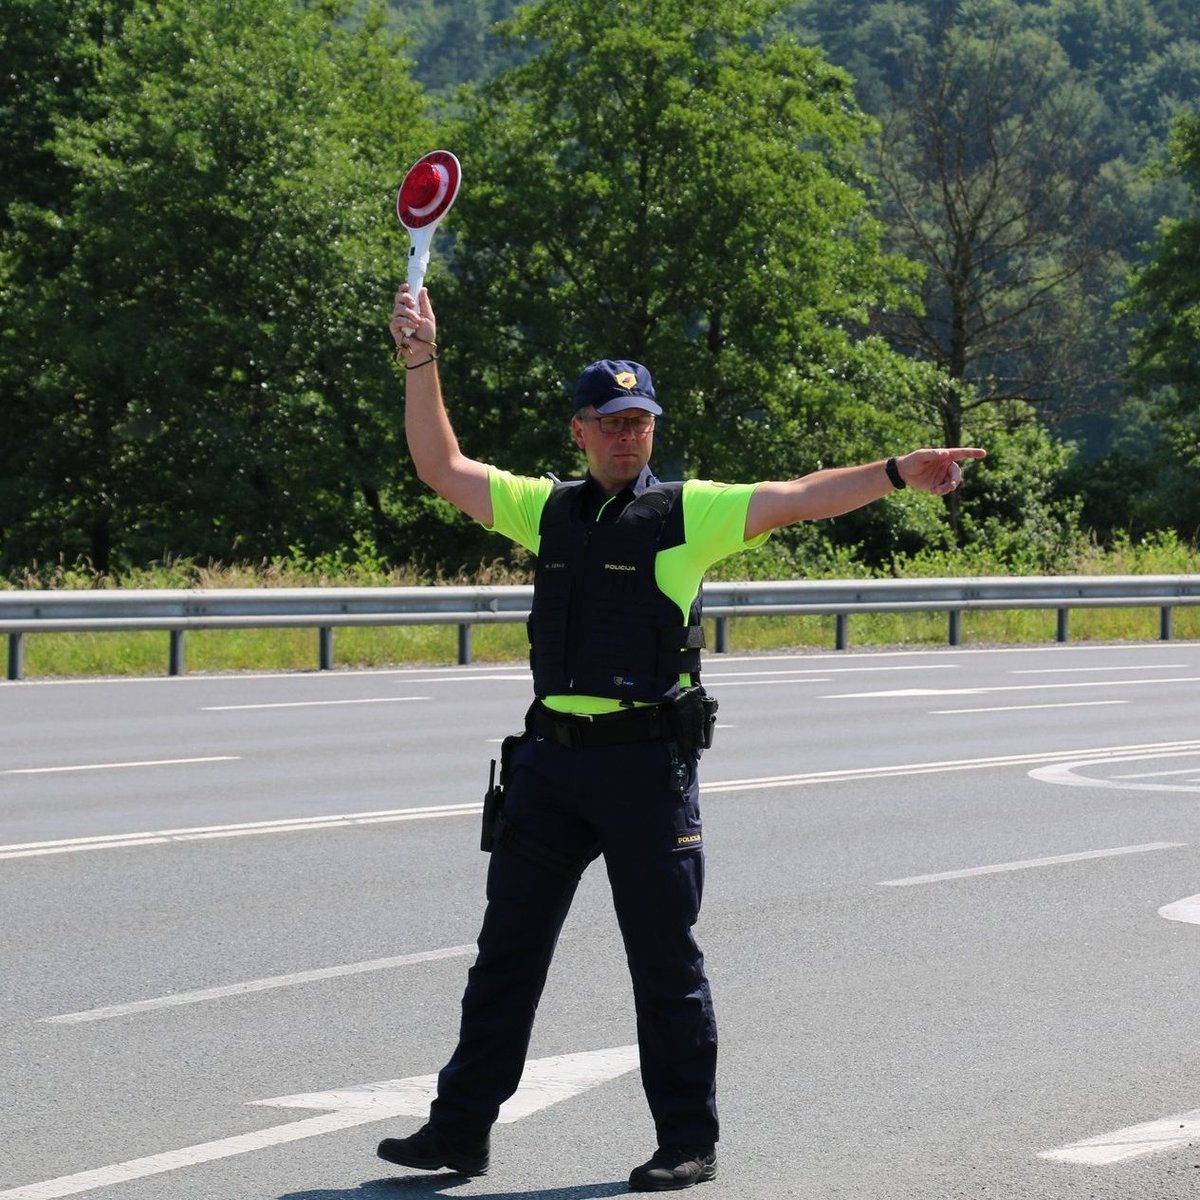 👮 👮‍♀️ Getting ready for the largest anti-speeding focused #police campaign on the planet. 🚨 It's crucial to rein in speeders if we're serious on our path to achieving #VisionZero by 2050 🚔 This Friday. 19 April. All over Europe! #speedmarathon #roadsafety